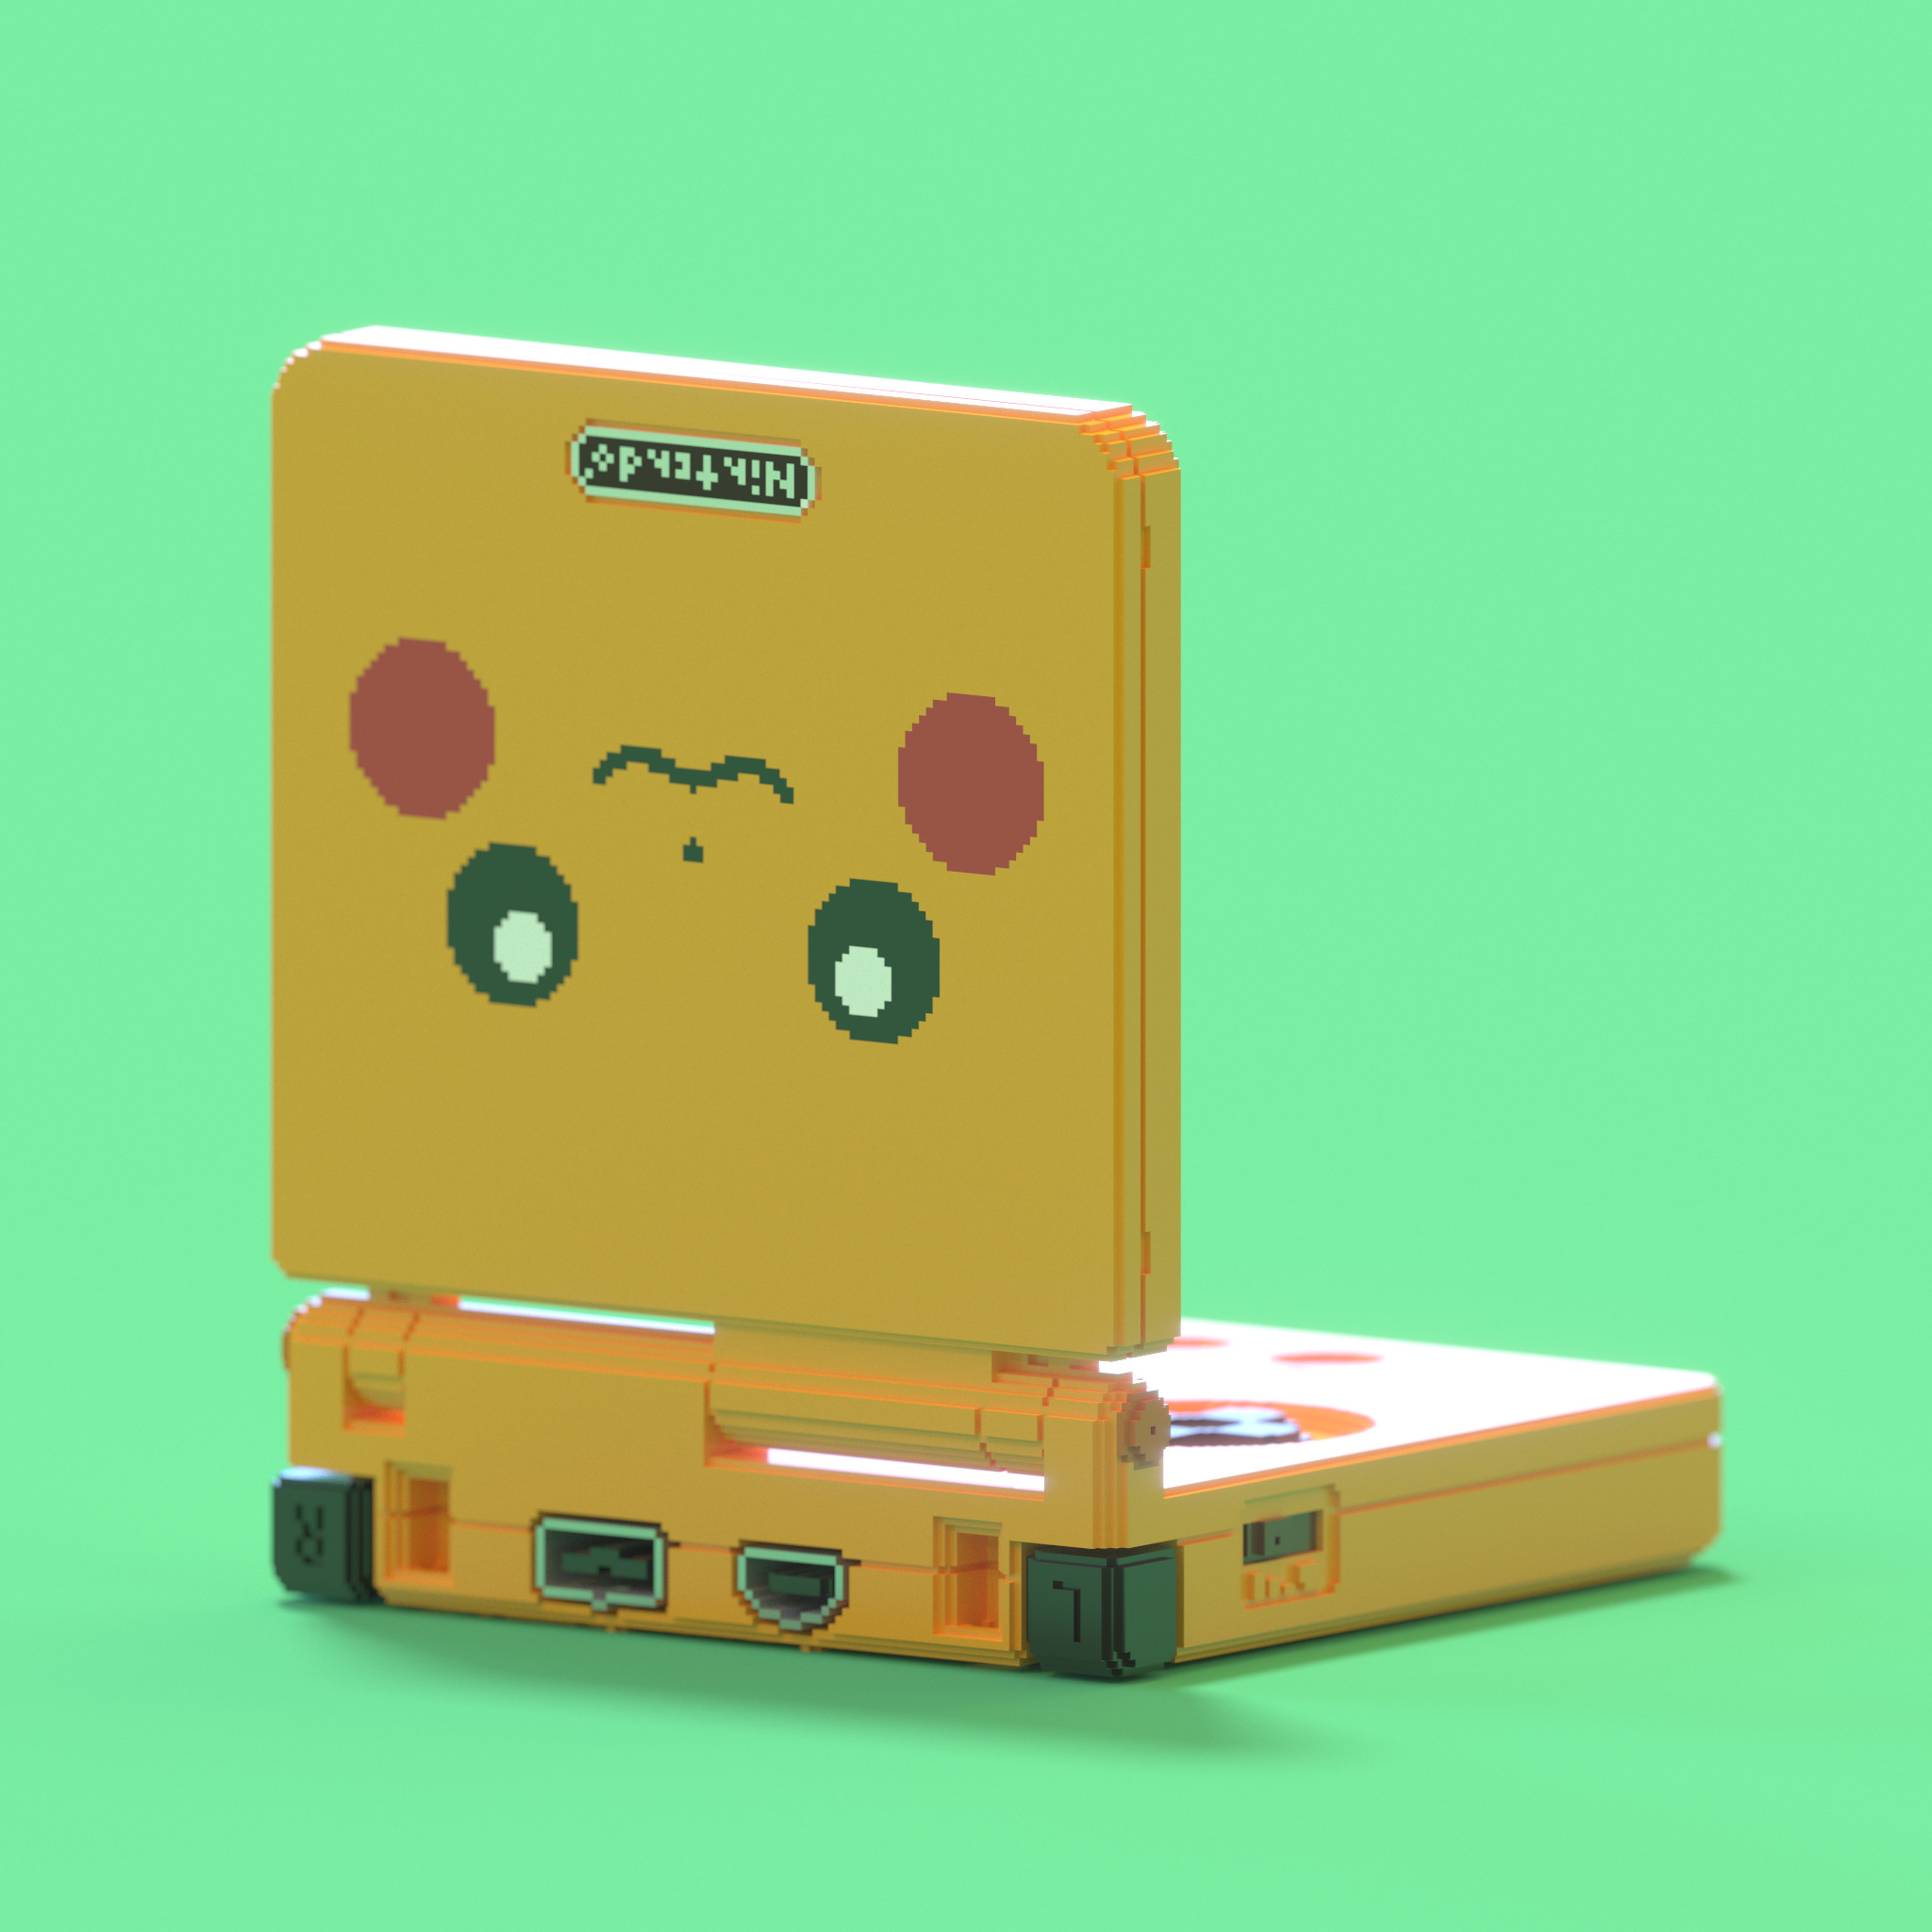 Rear view of a voxel Nintendo Game Boy Advance SP AGS-101, revealing a "Limited Edition Pikachu" face.